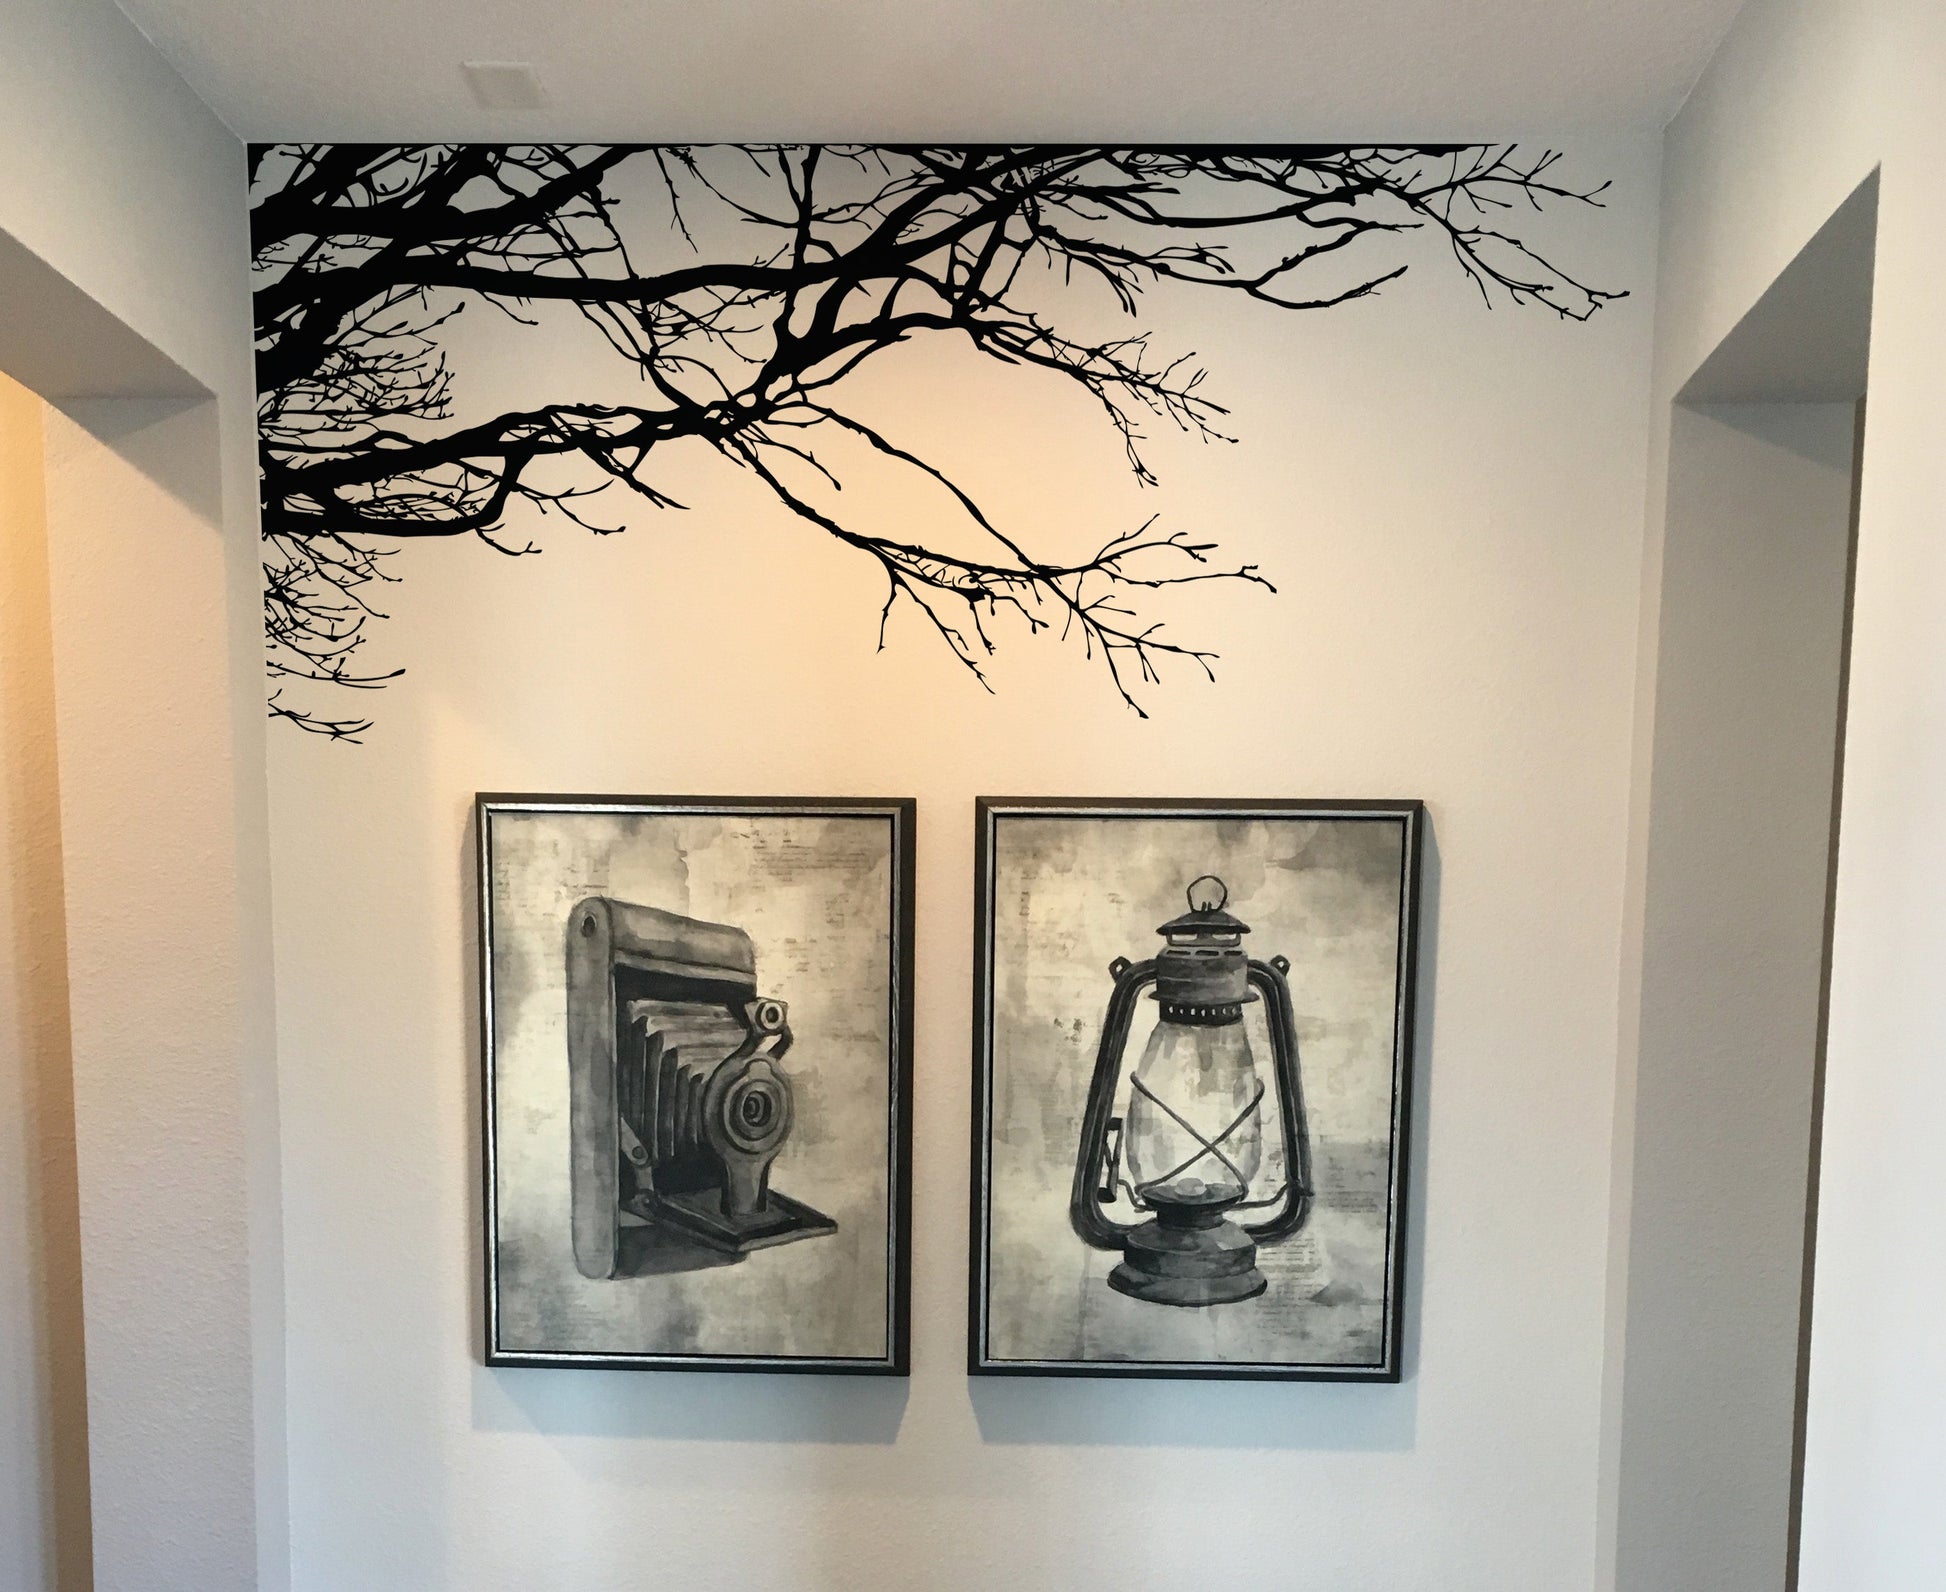 A white wall with a black tree decal, with framed photographs of an old camera and a lantern underneath it.